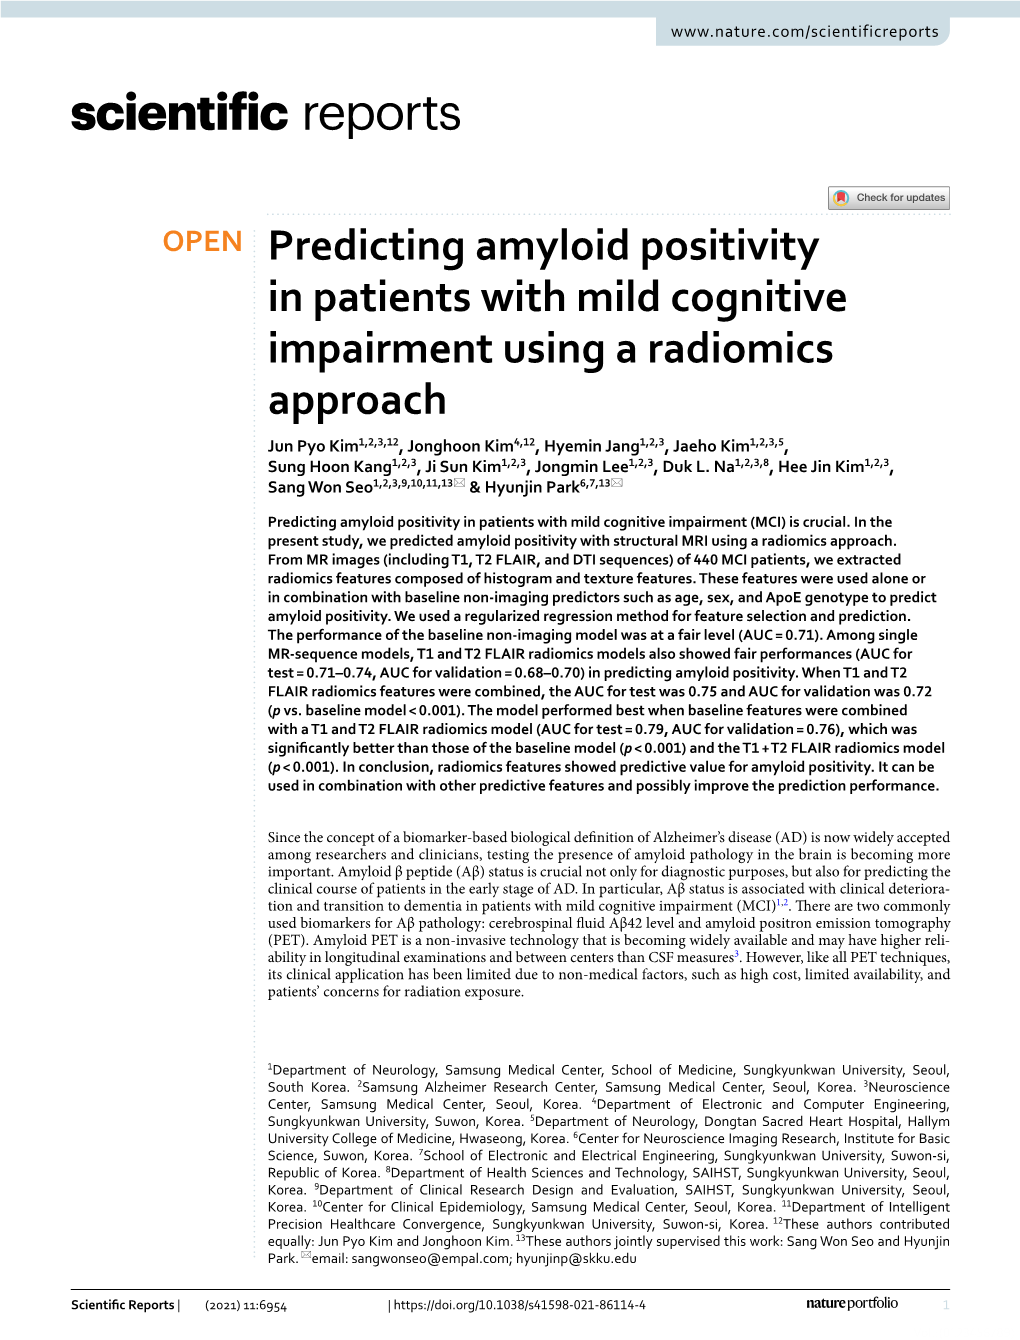 Predicting Amyloid Positivity in Patients with Mild Cognitive